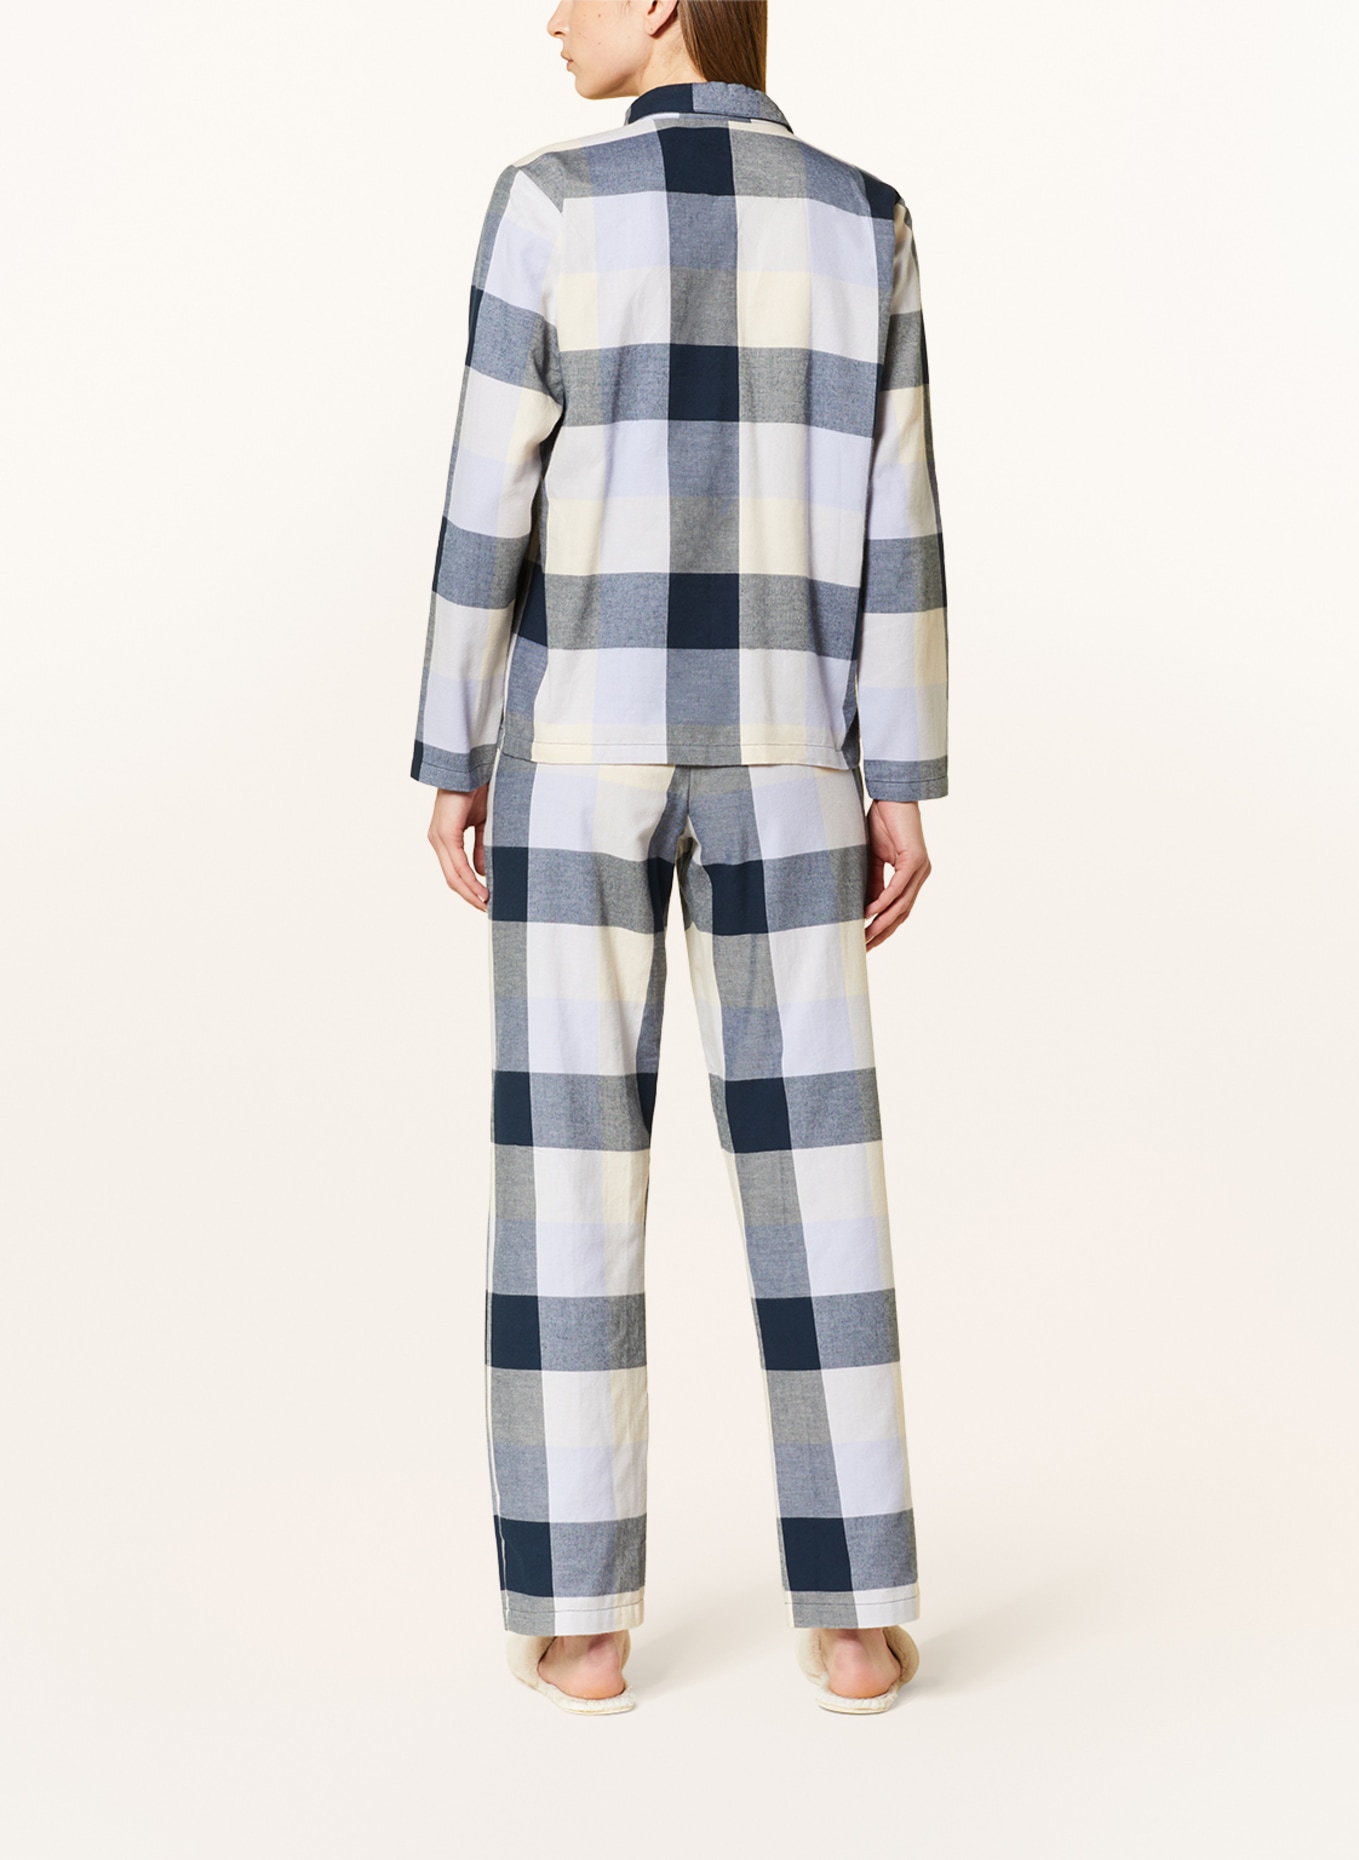 SCHIESSER Pajamas CASUAL ESSENTIAL made of terry cloth in dark